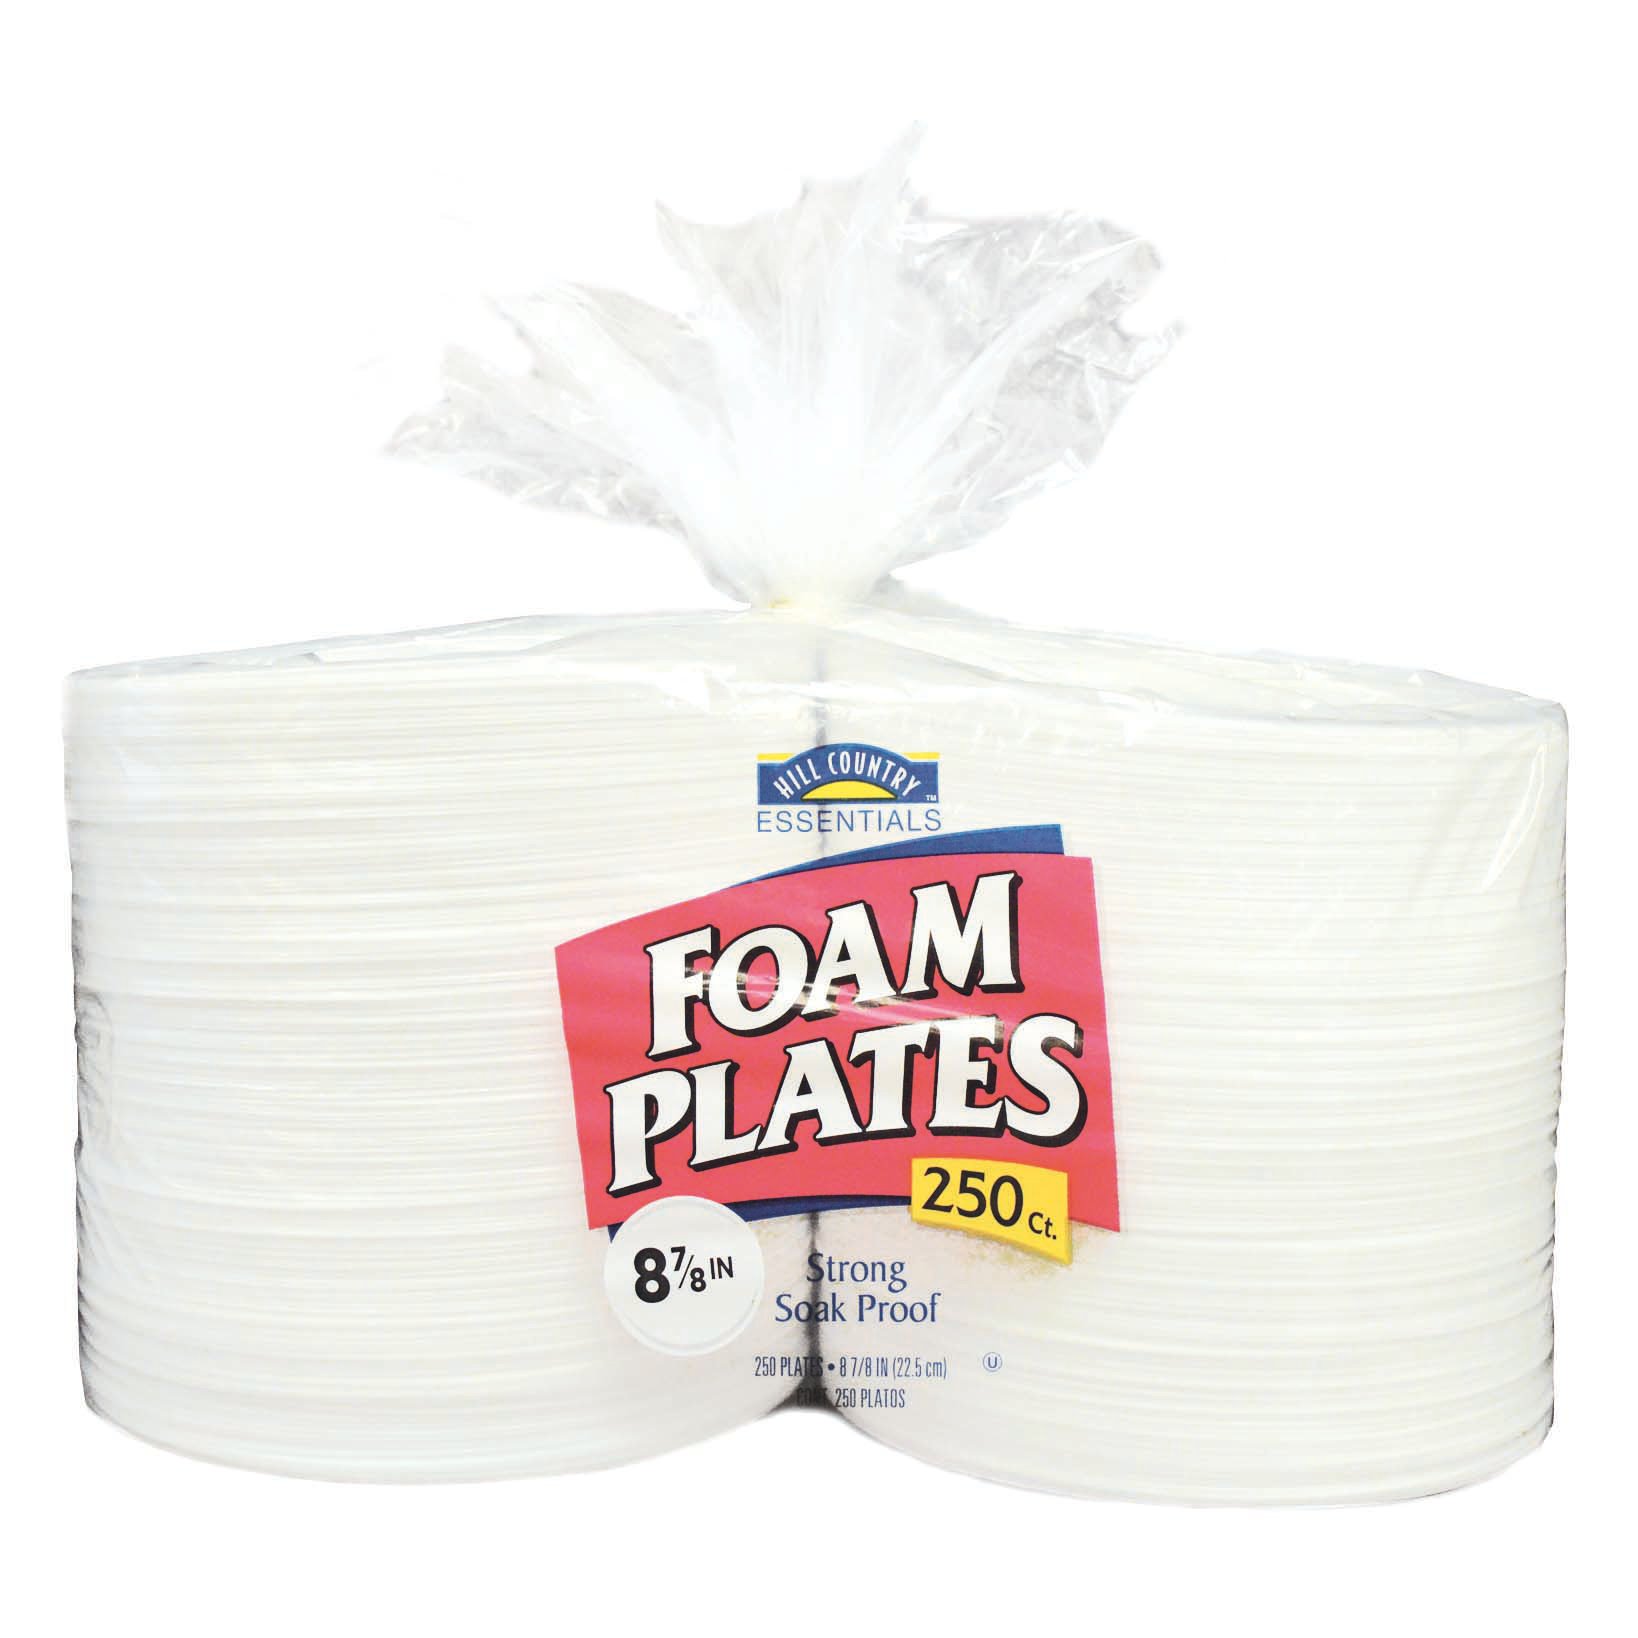 Hill Country Essentials 8.8 in Foam Plates - Shop Plates & Bowls